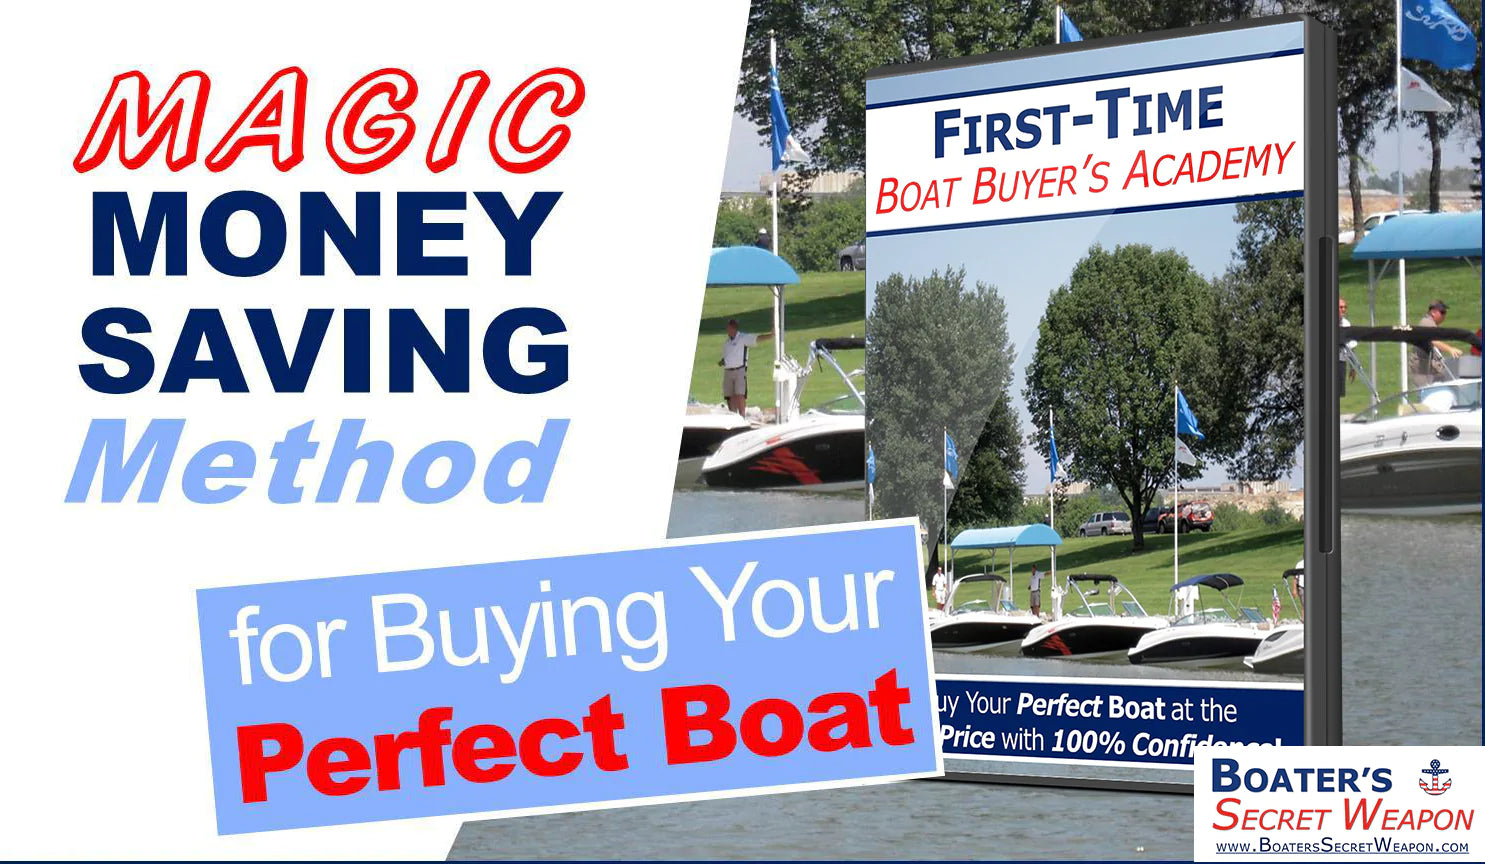 [VALENTINE SALE] First-Time Boat Buyer's Academy